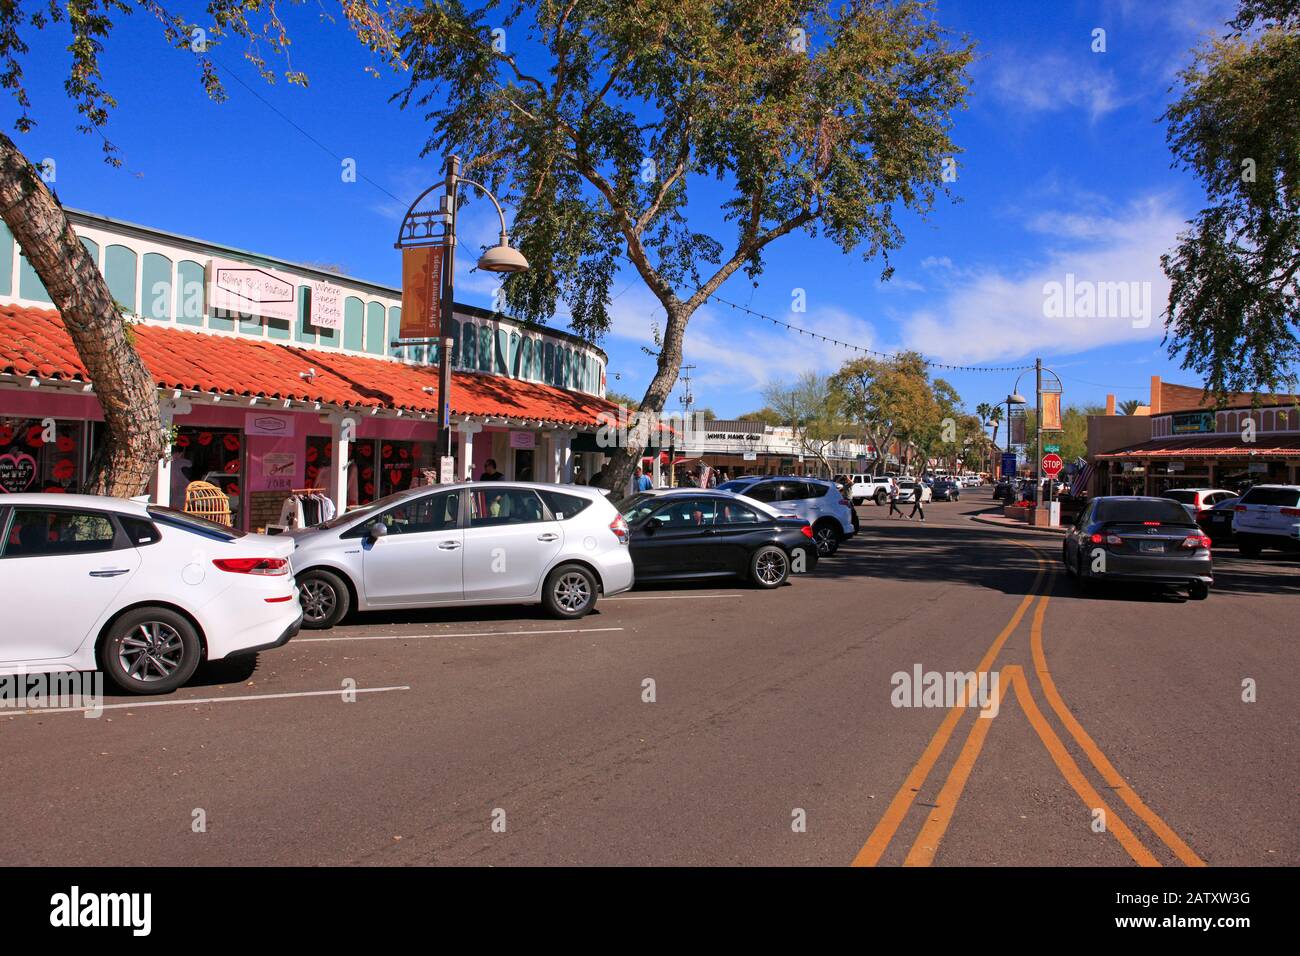 People enjoying the free parking and welcoming stores in the 5th Ave shopping district of Old Town Scottsdale AZ Stock Photo